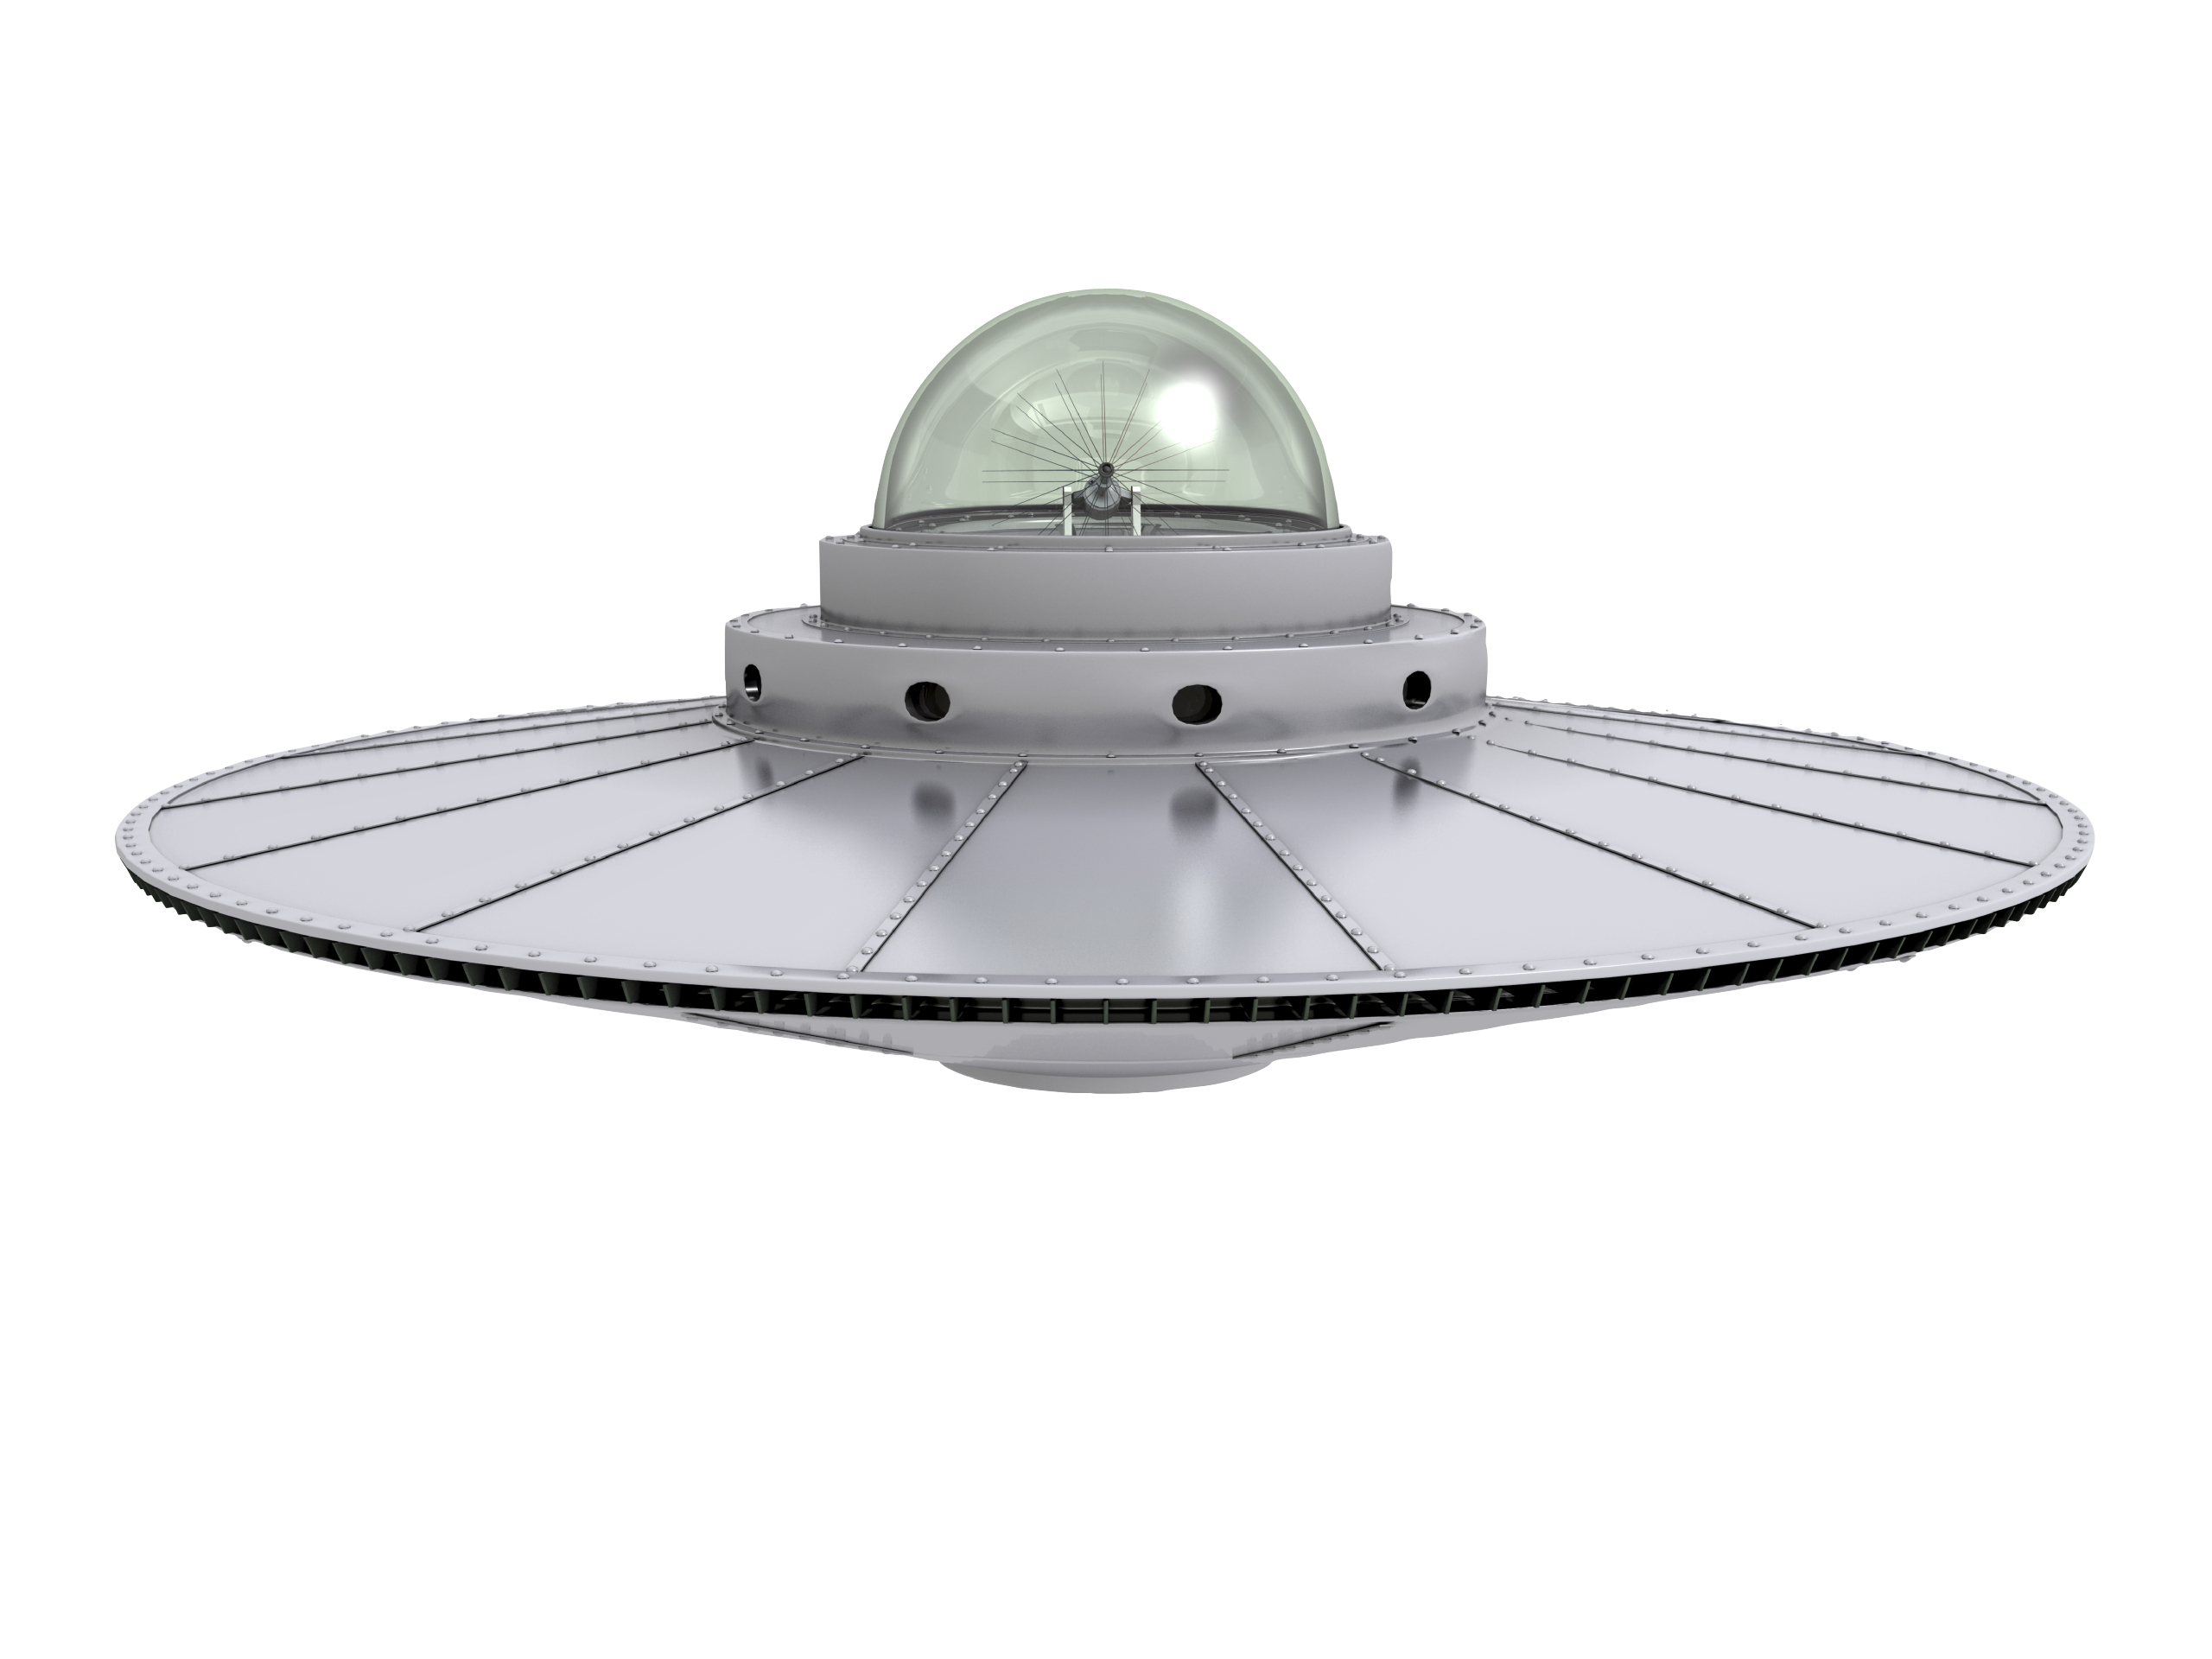 Flying Saucer By Absurdwordpreferred Flying Saucer By Absurdwordpreferred - Saucer, Transparent background PNG HD thumbnail